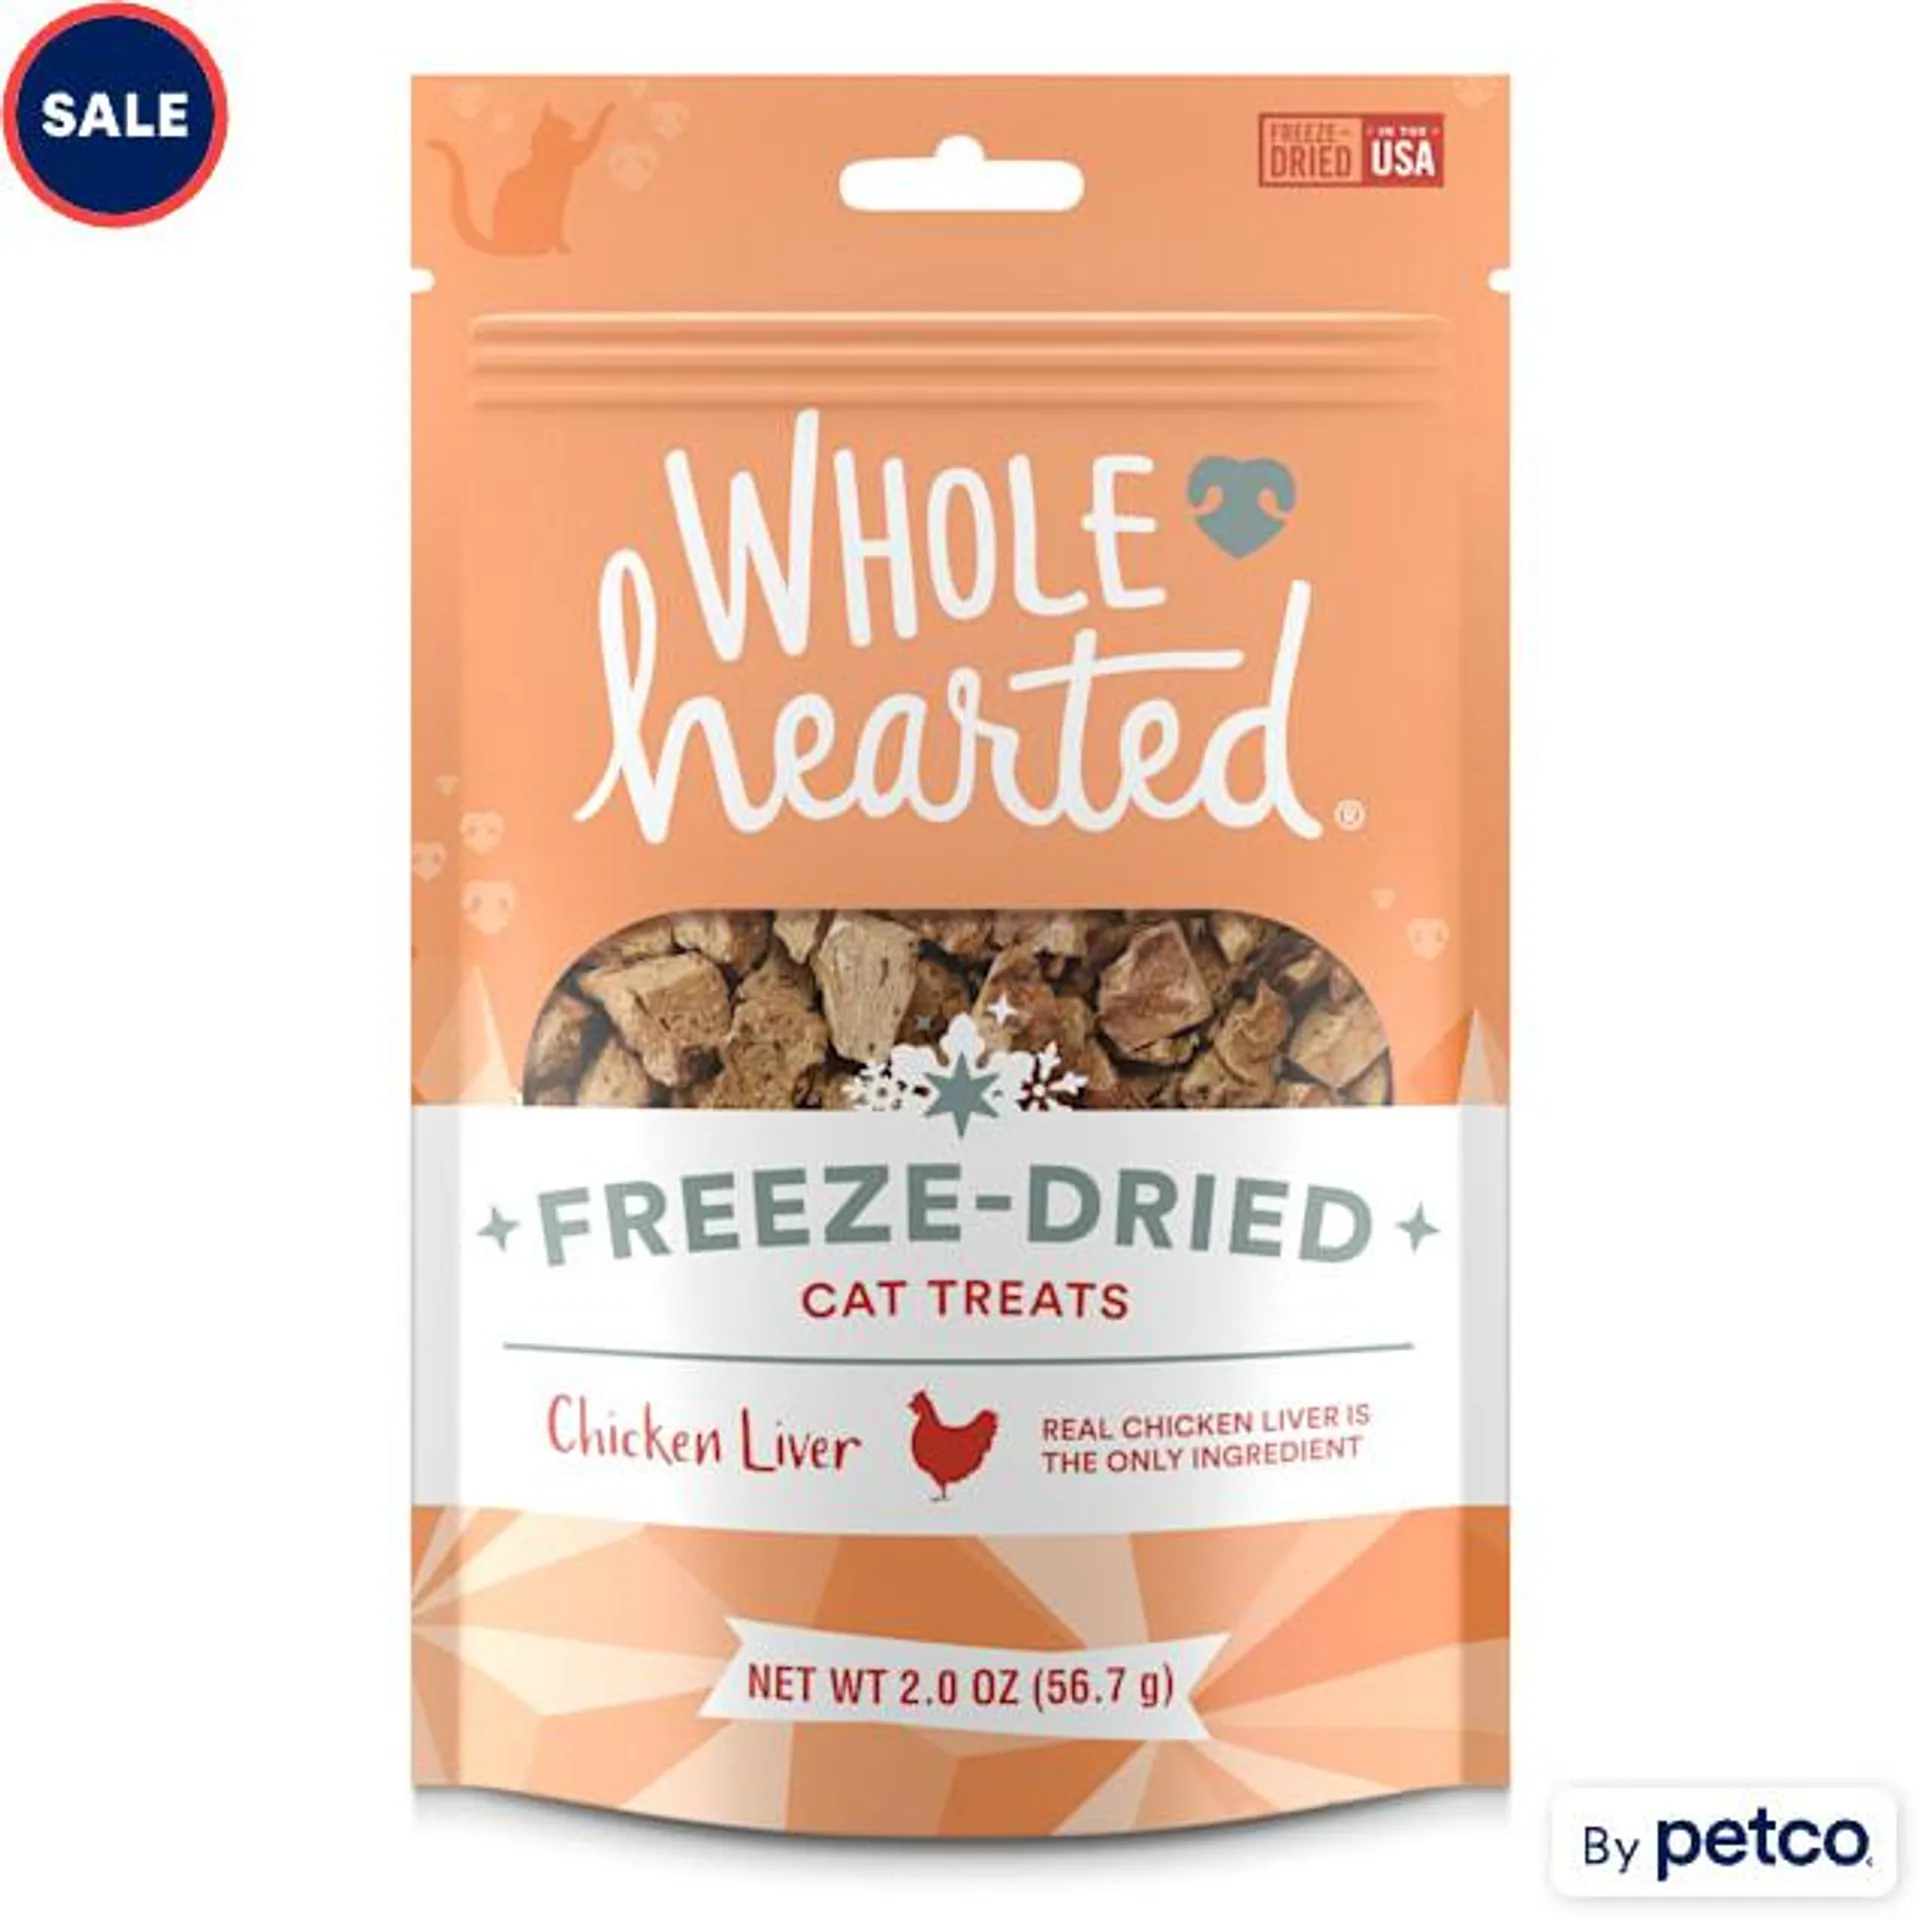 WholeHearted Chicken Liver Freeze-Dried Cat Treats, 2 oz.